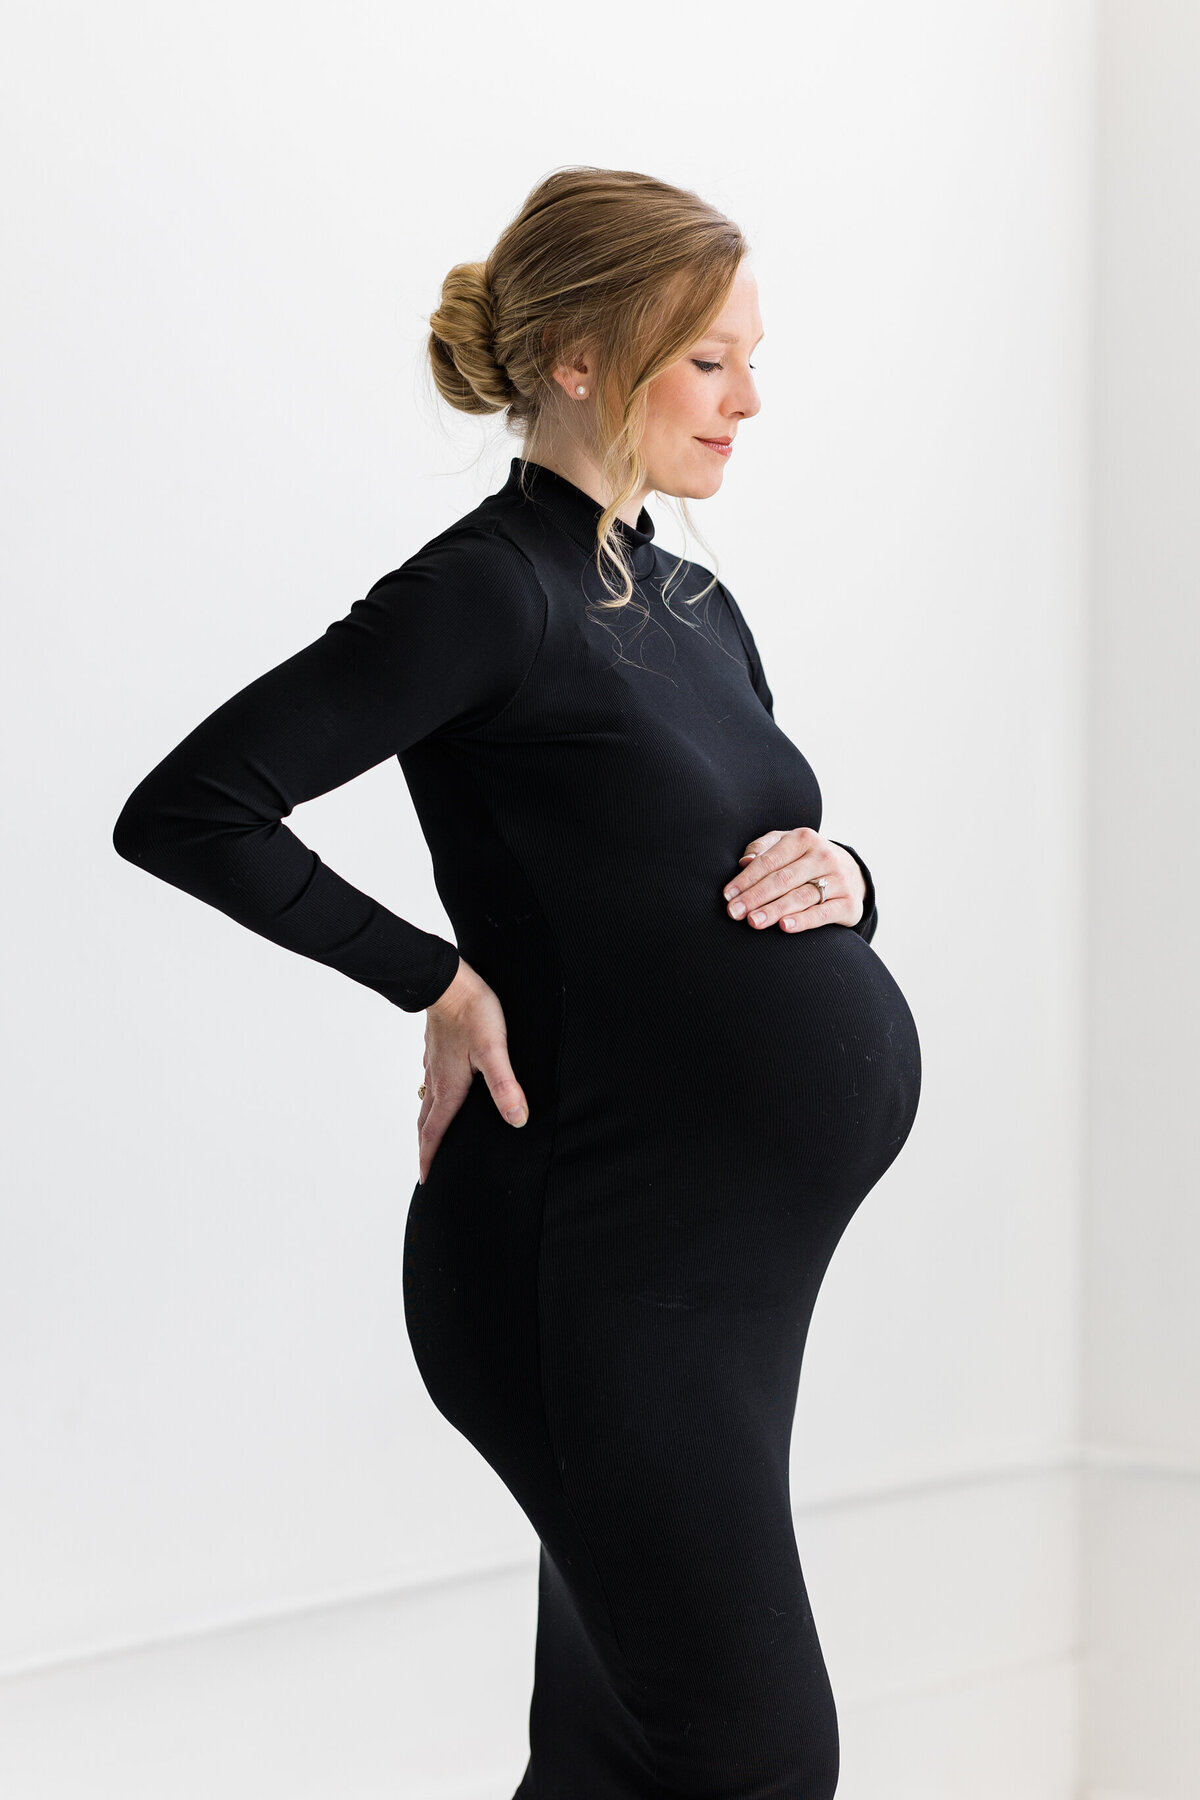 maternity-session-at-the-lumen-room-ft-worth-texas